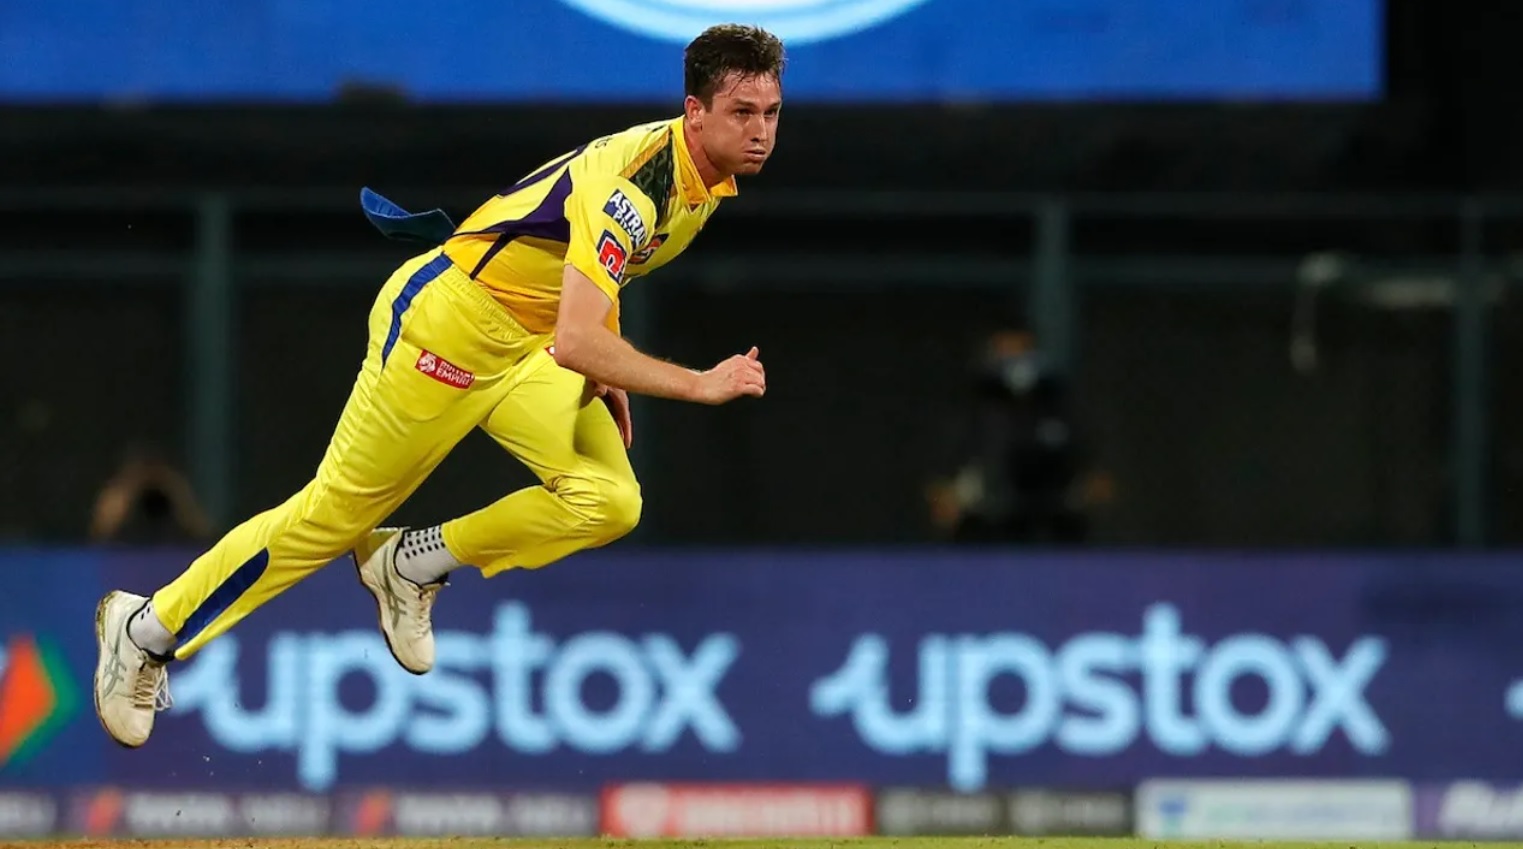 IPL 2022 | Adam Milne ruled out of IPL due to hamstring injury, CSK announces Matheesha Pathirana as replacement